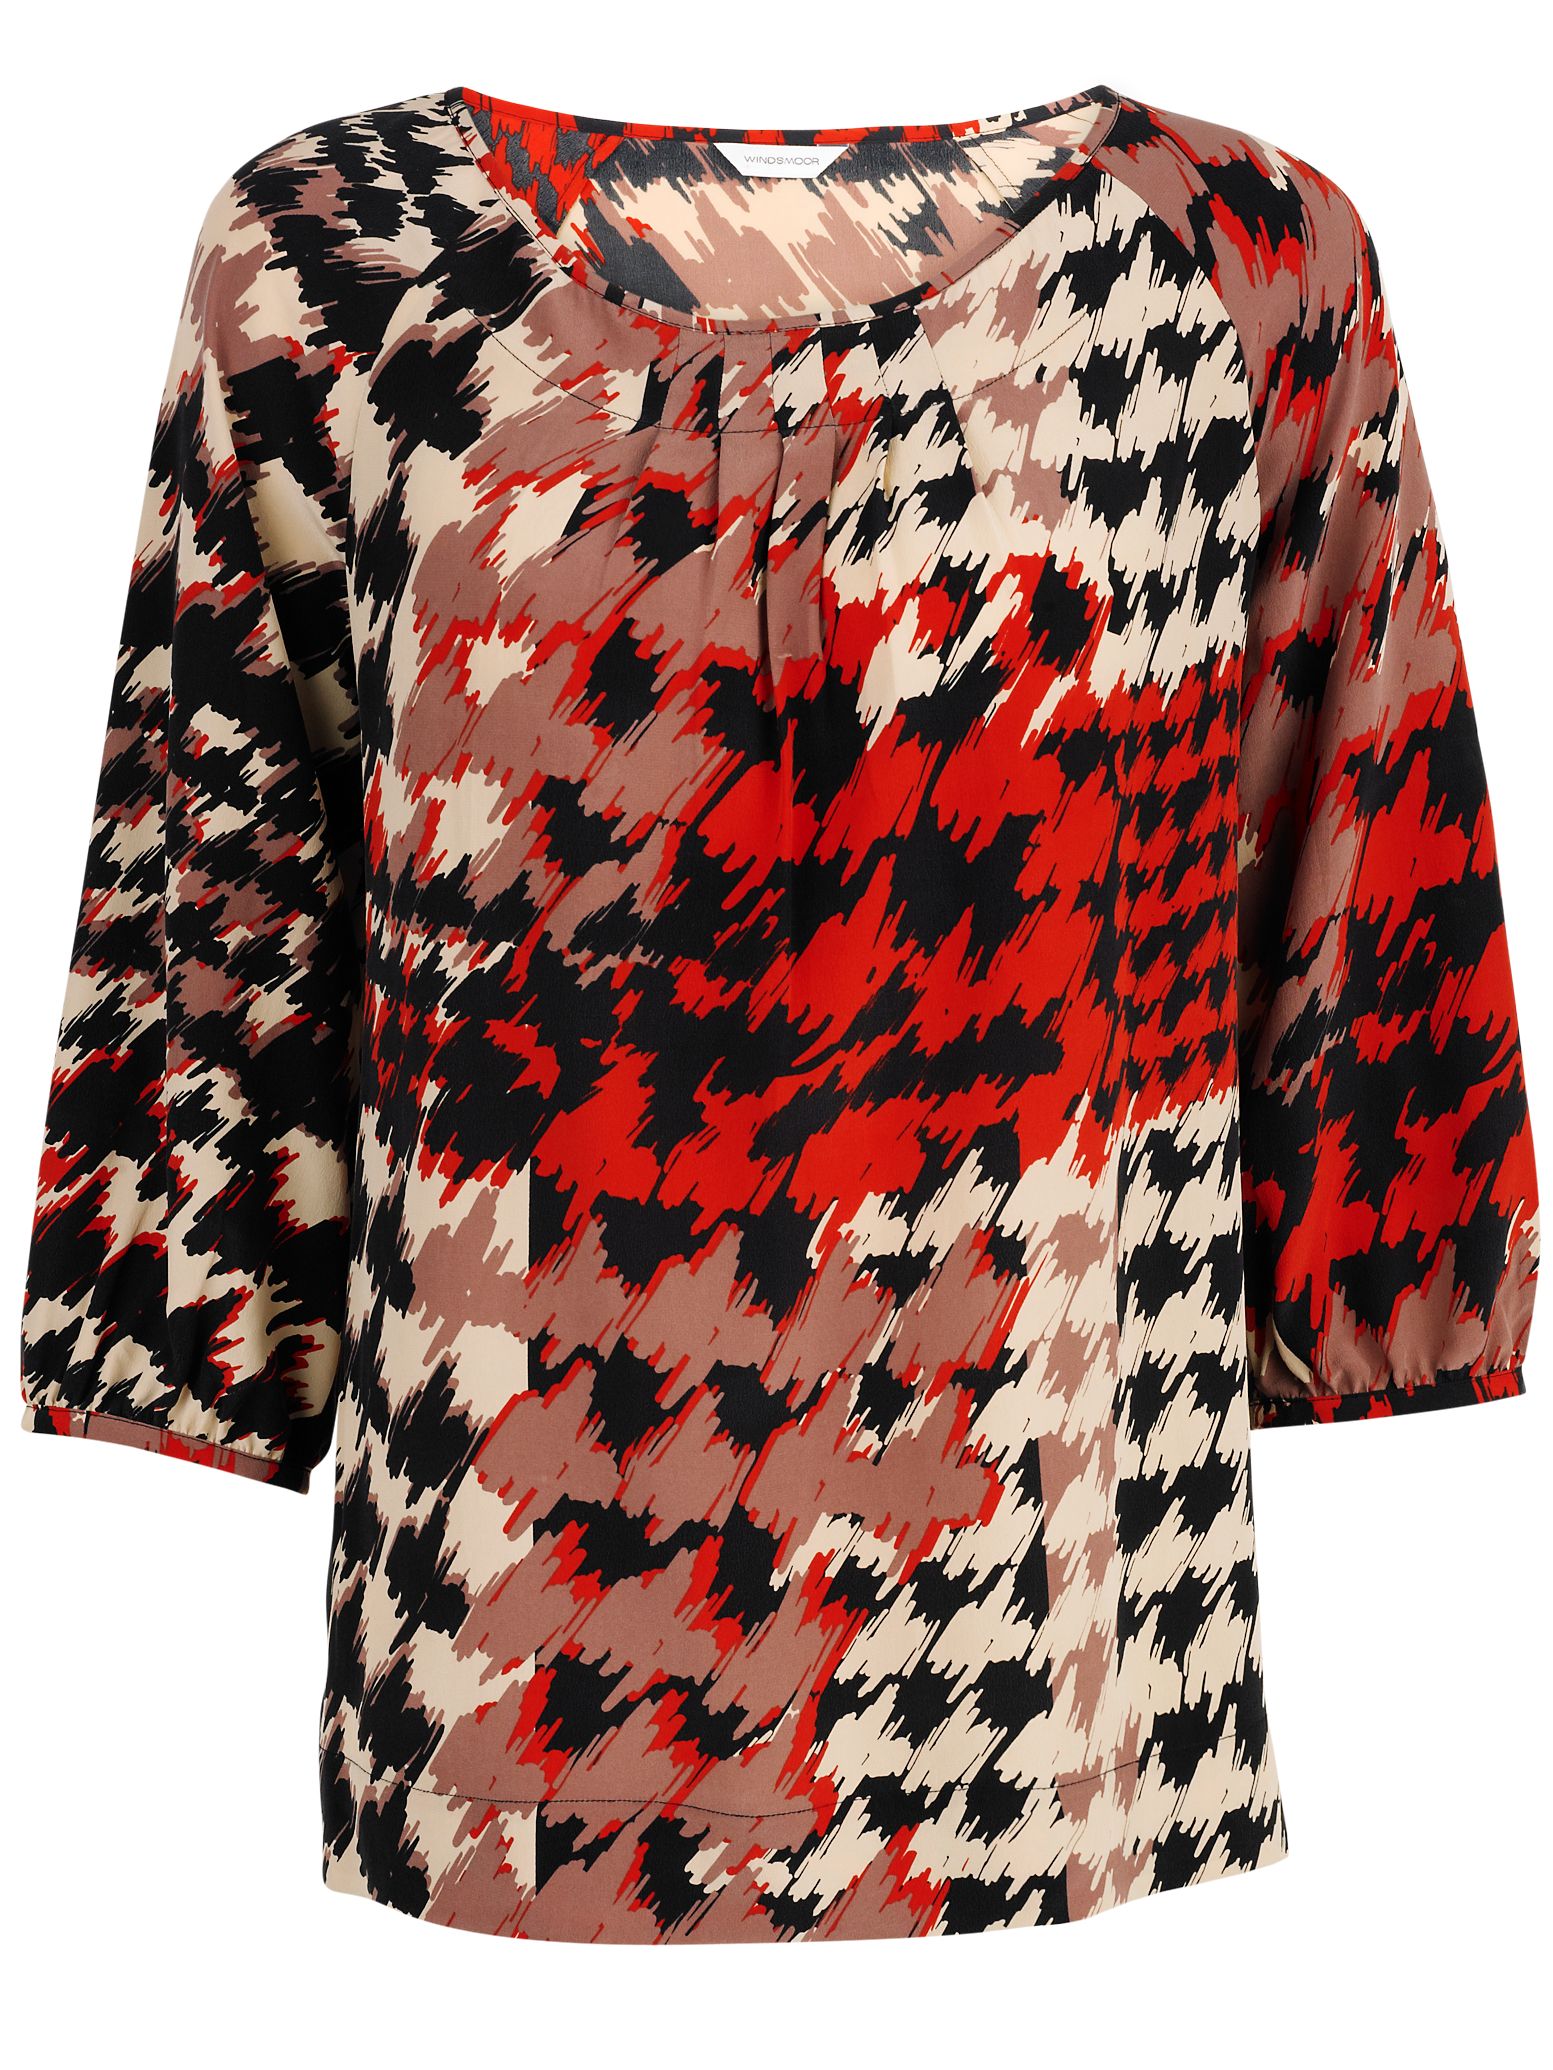 Dogtooth Smudge Blouse, Red/Black